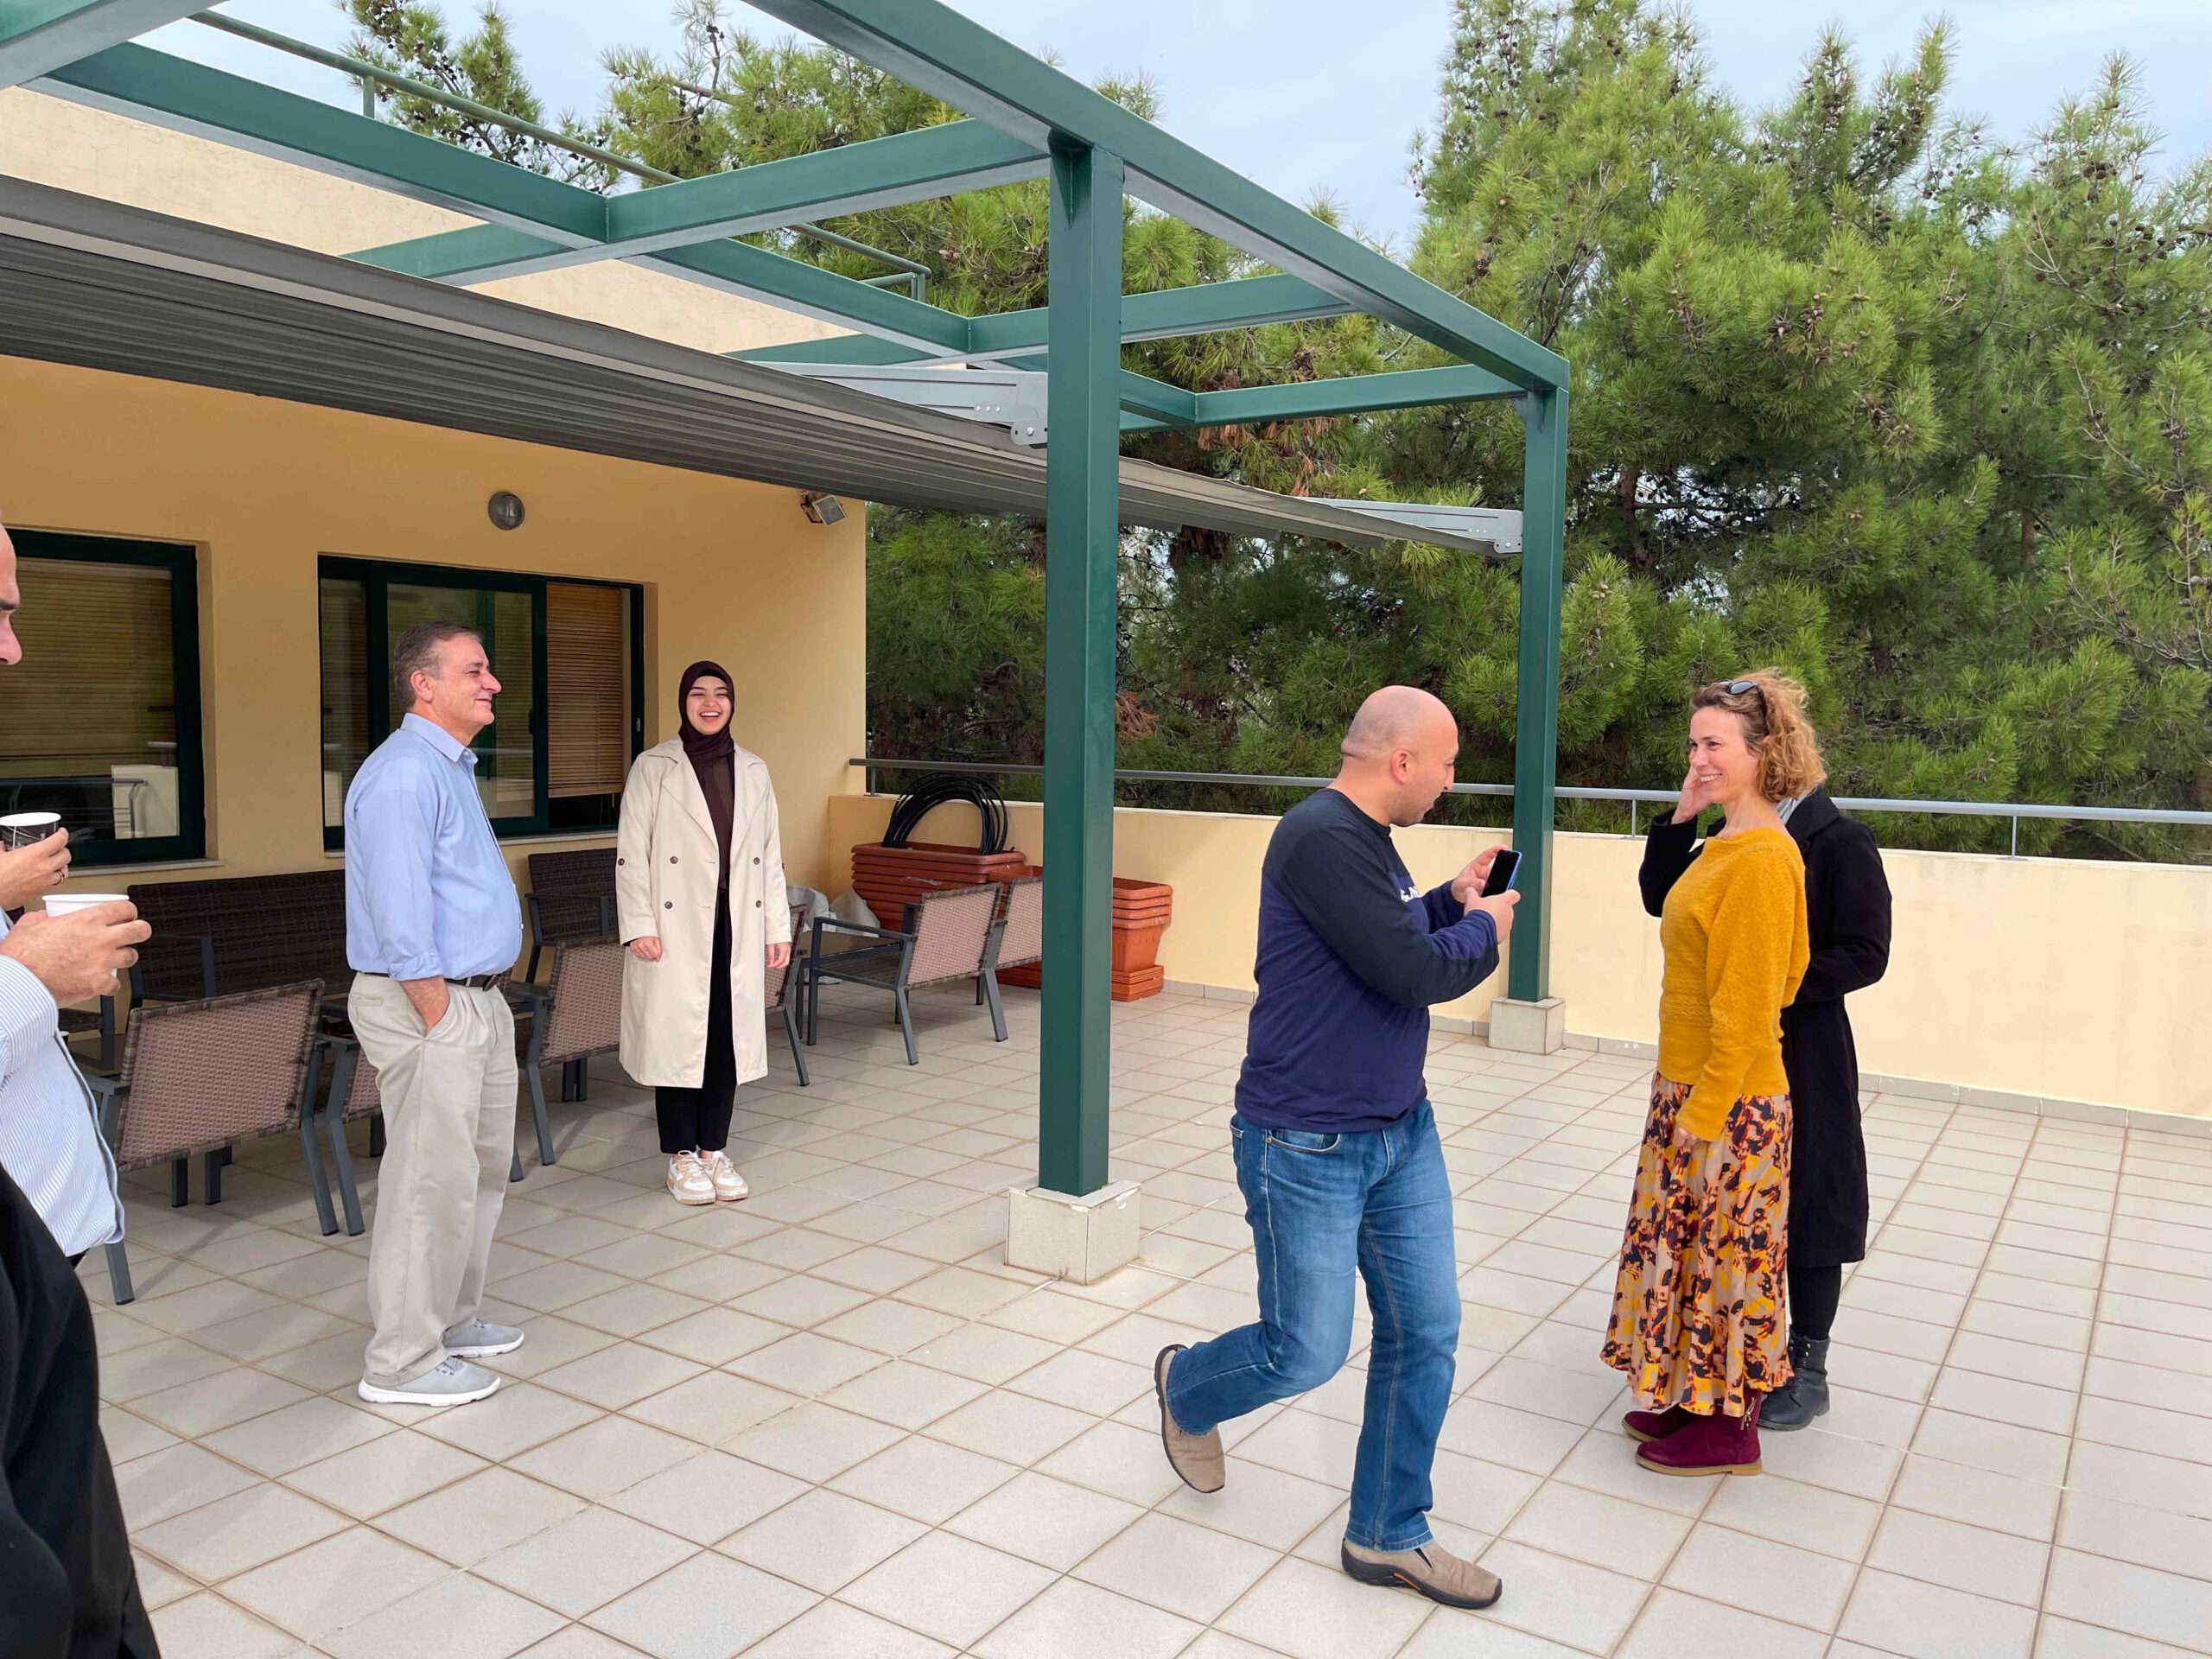 practice on escort of persons with vision impairment at Athens